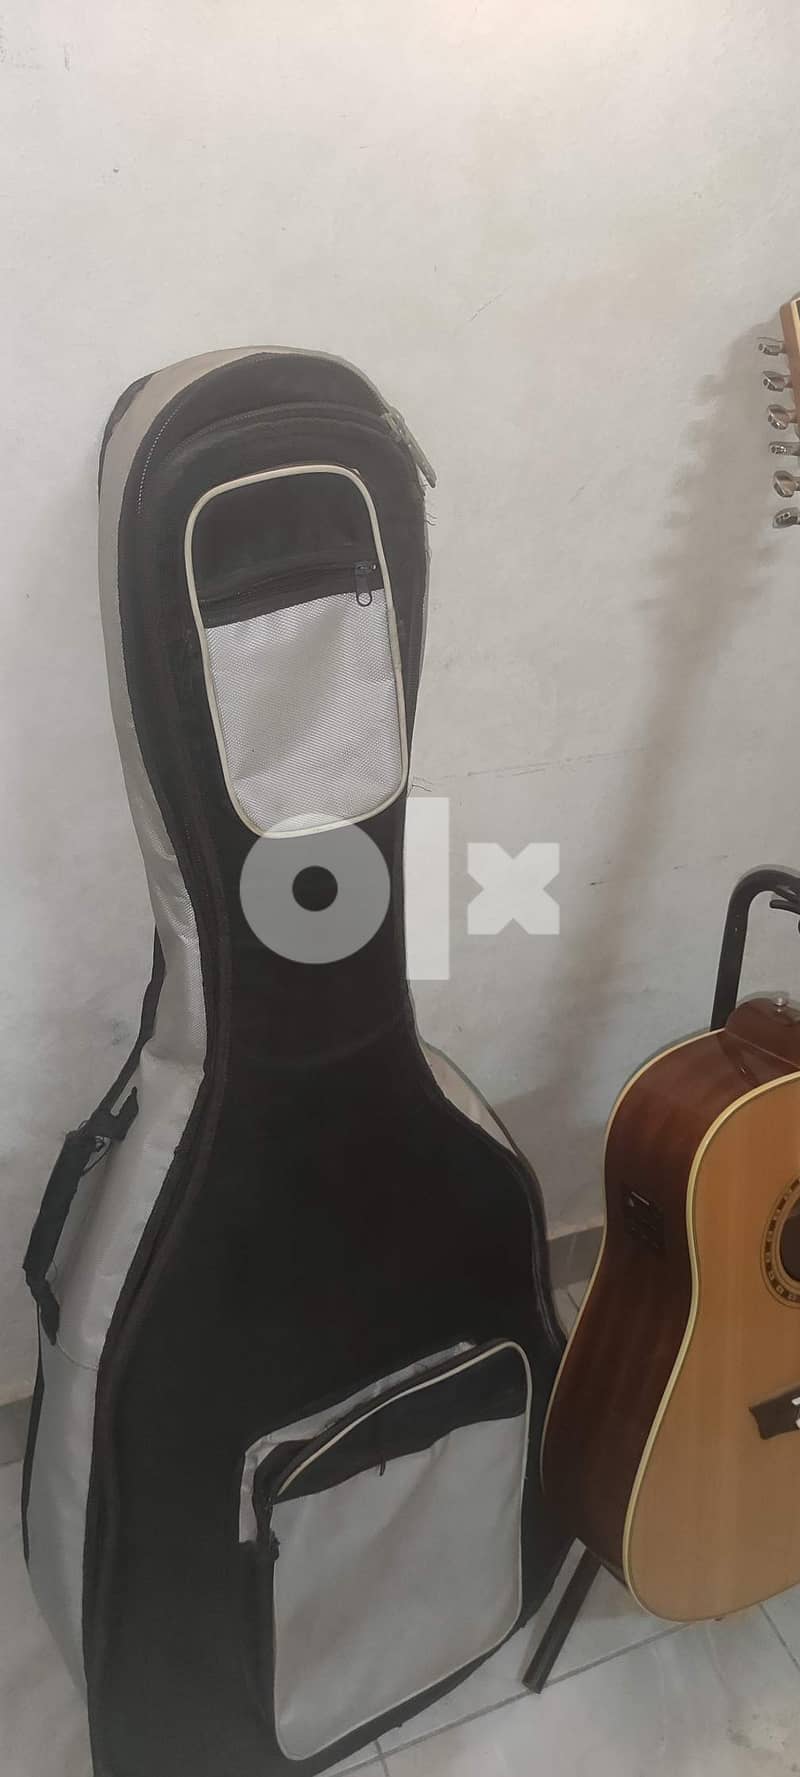 Washburn 12 String Acoustic / Electric Guitar - جيتار 12 وتر 2